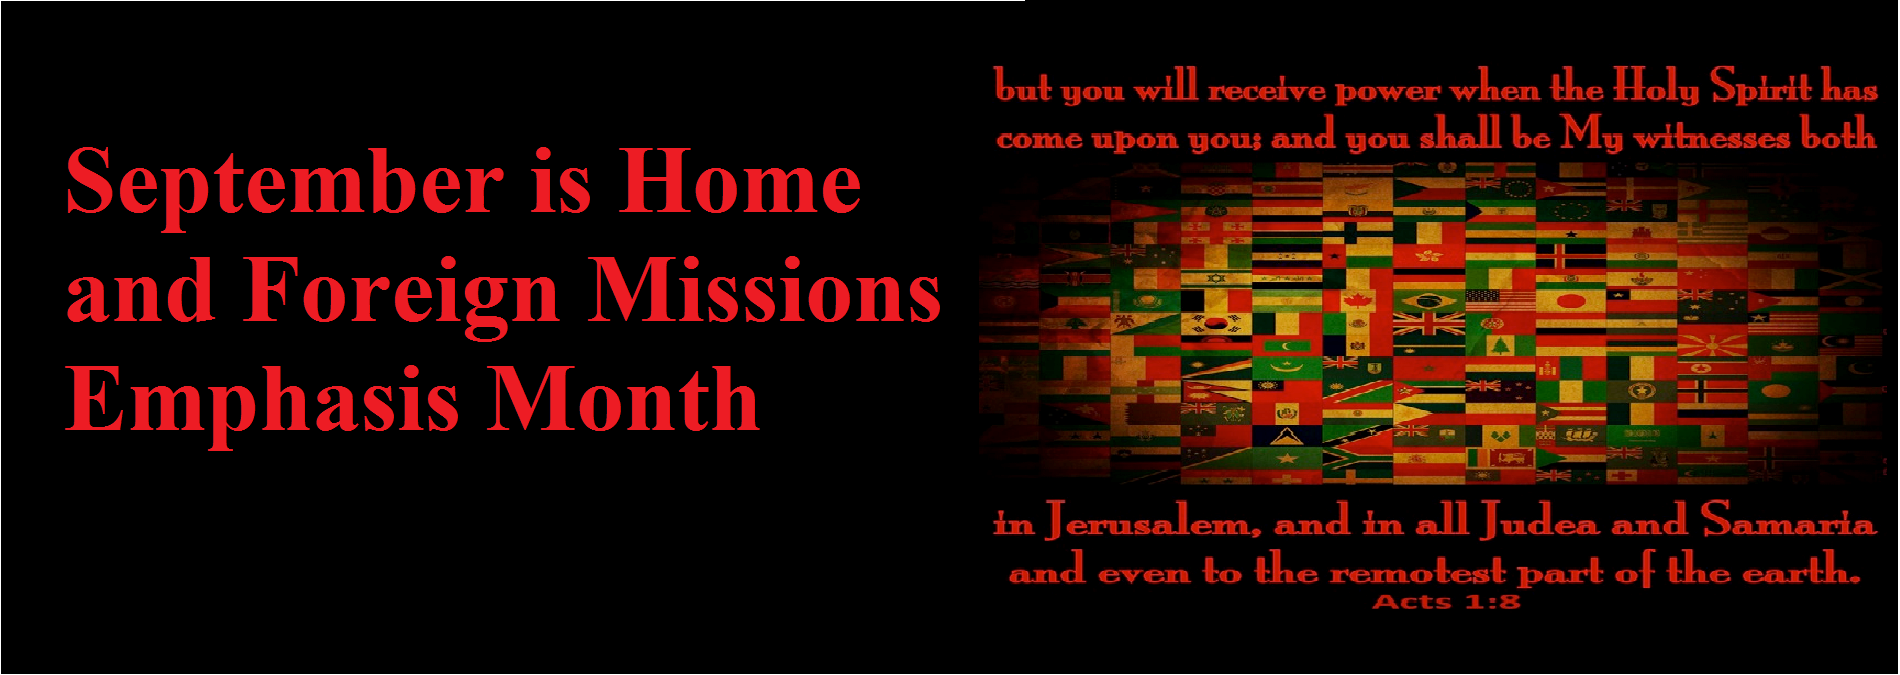 Home and Foreign Mission Emphasis